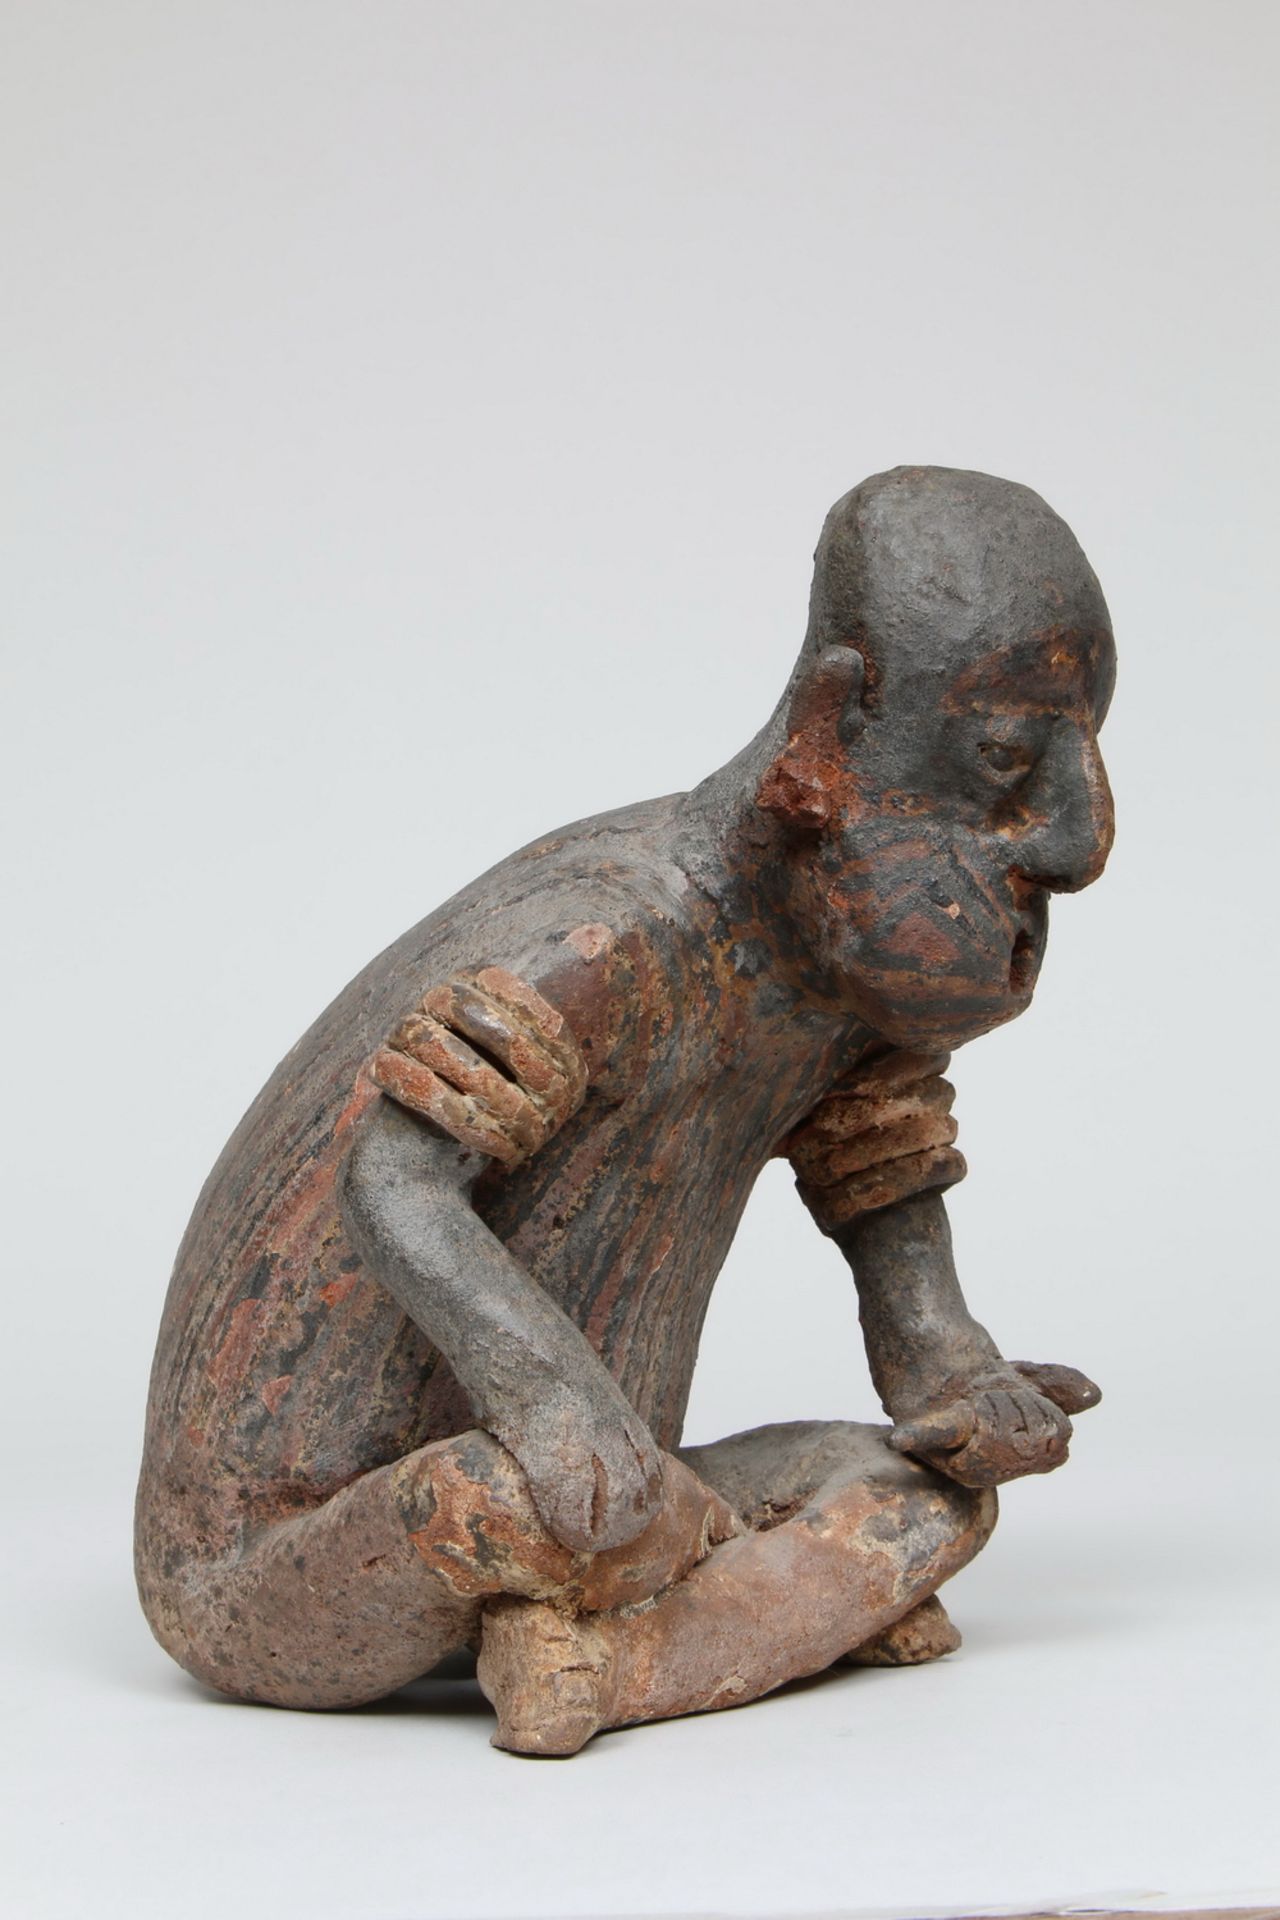 Mexico, Jalisco, a large terracotta seated figure with bent back, 1st BC - 2nd century AD,